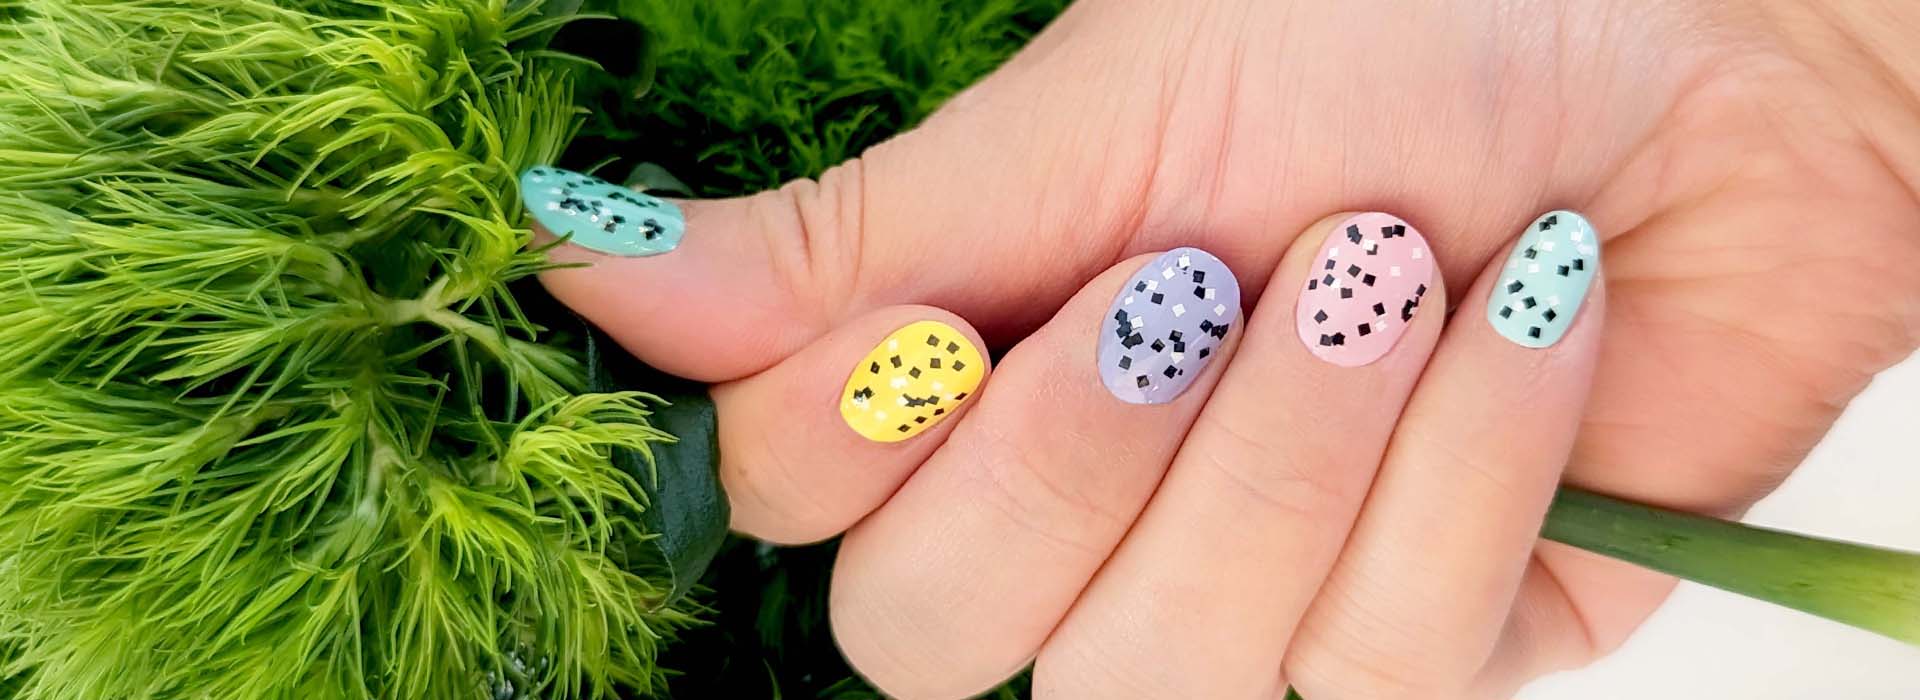 7. Pastel Nail Designs for Teen Girls - wide 6